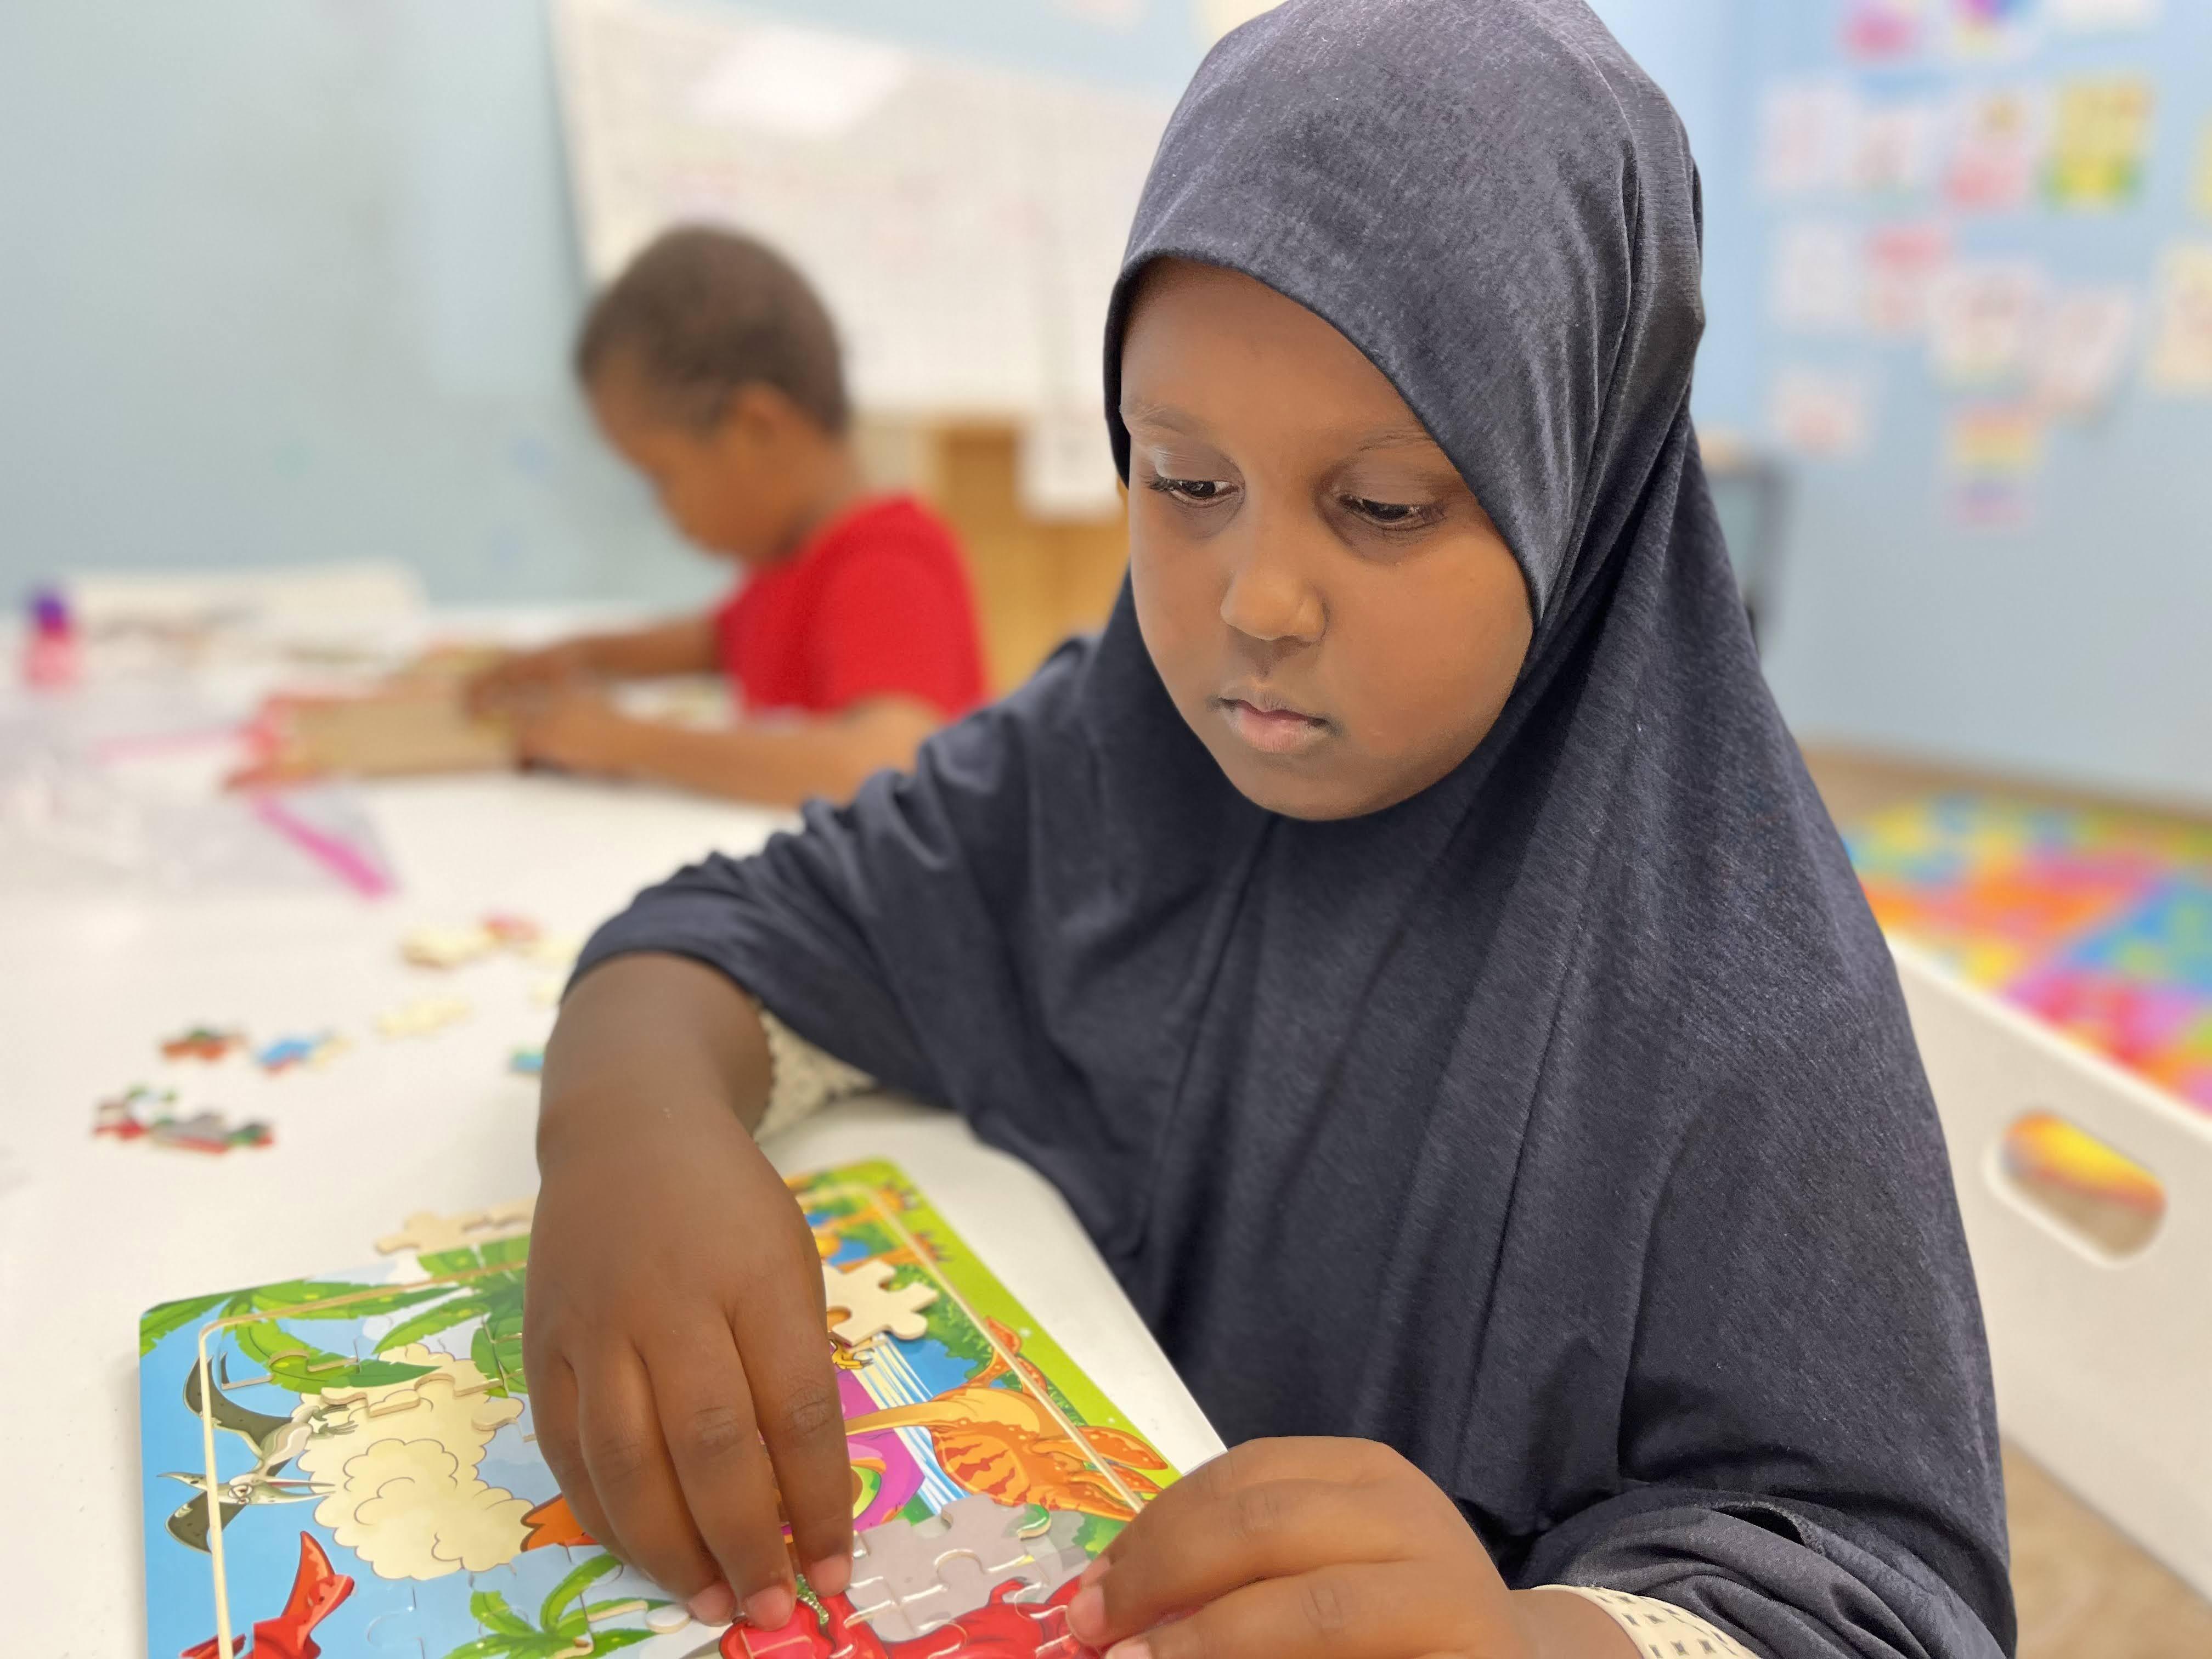 A girl wearing a hijab works on a project at school.